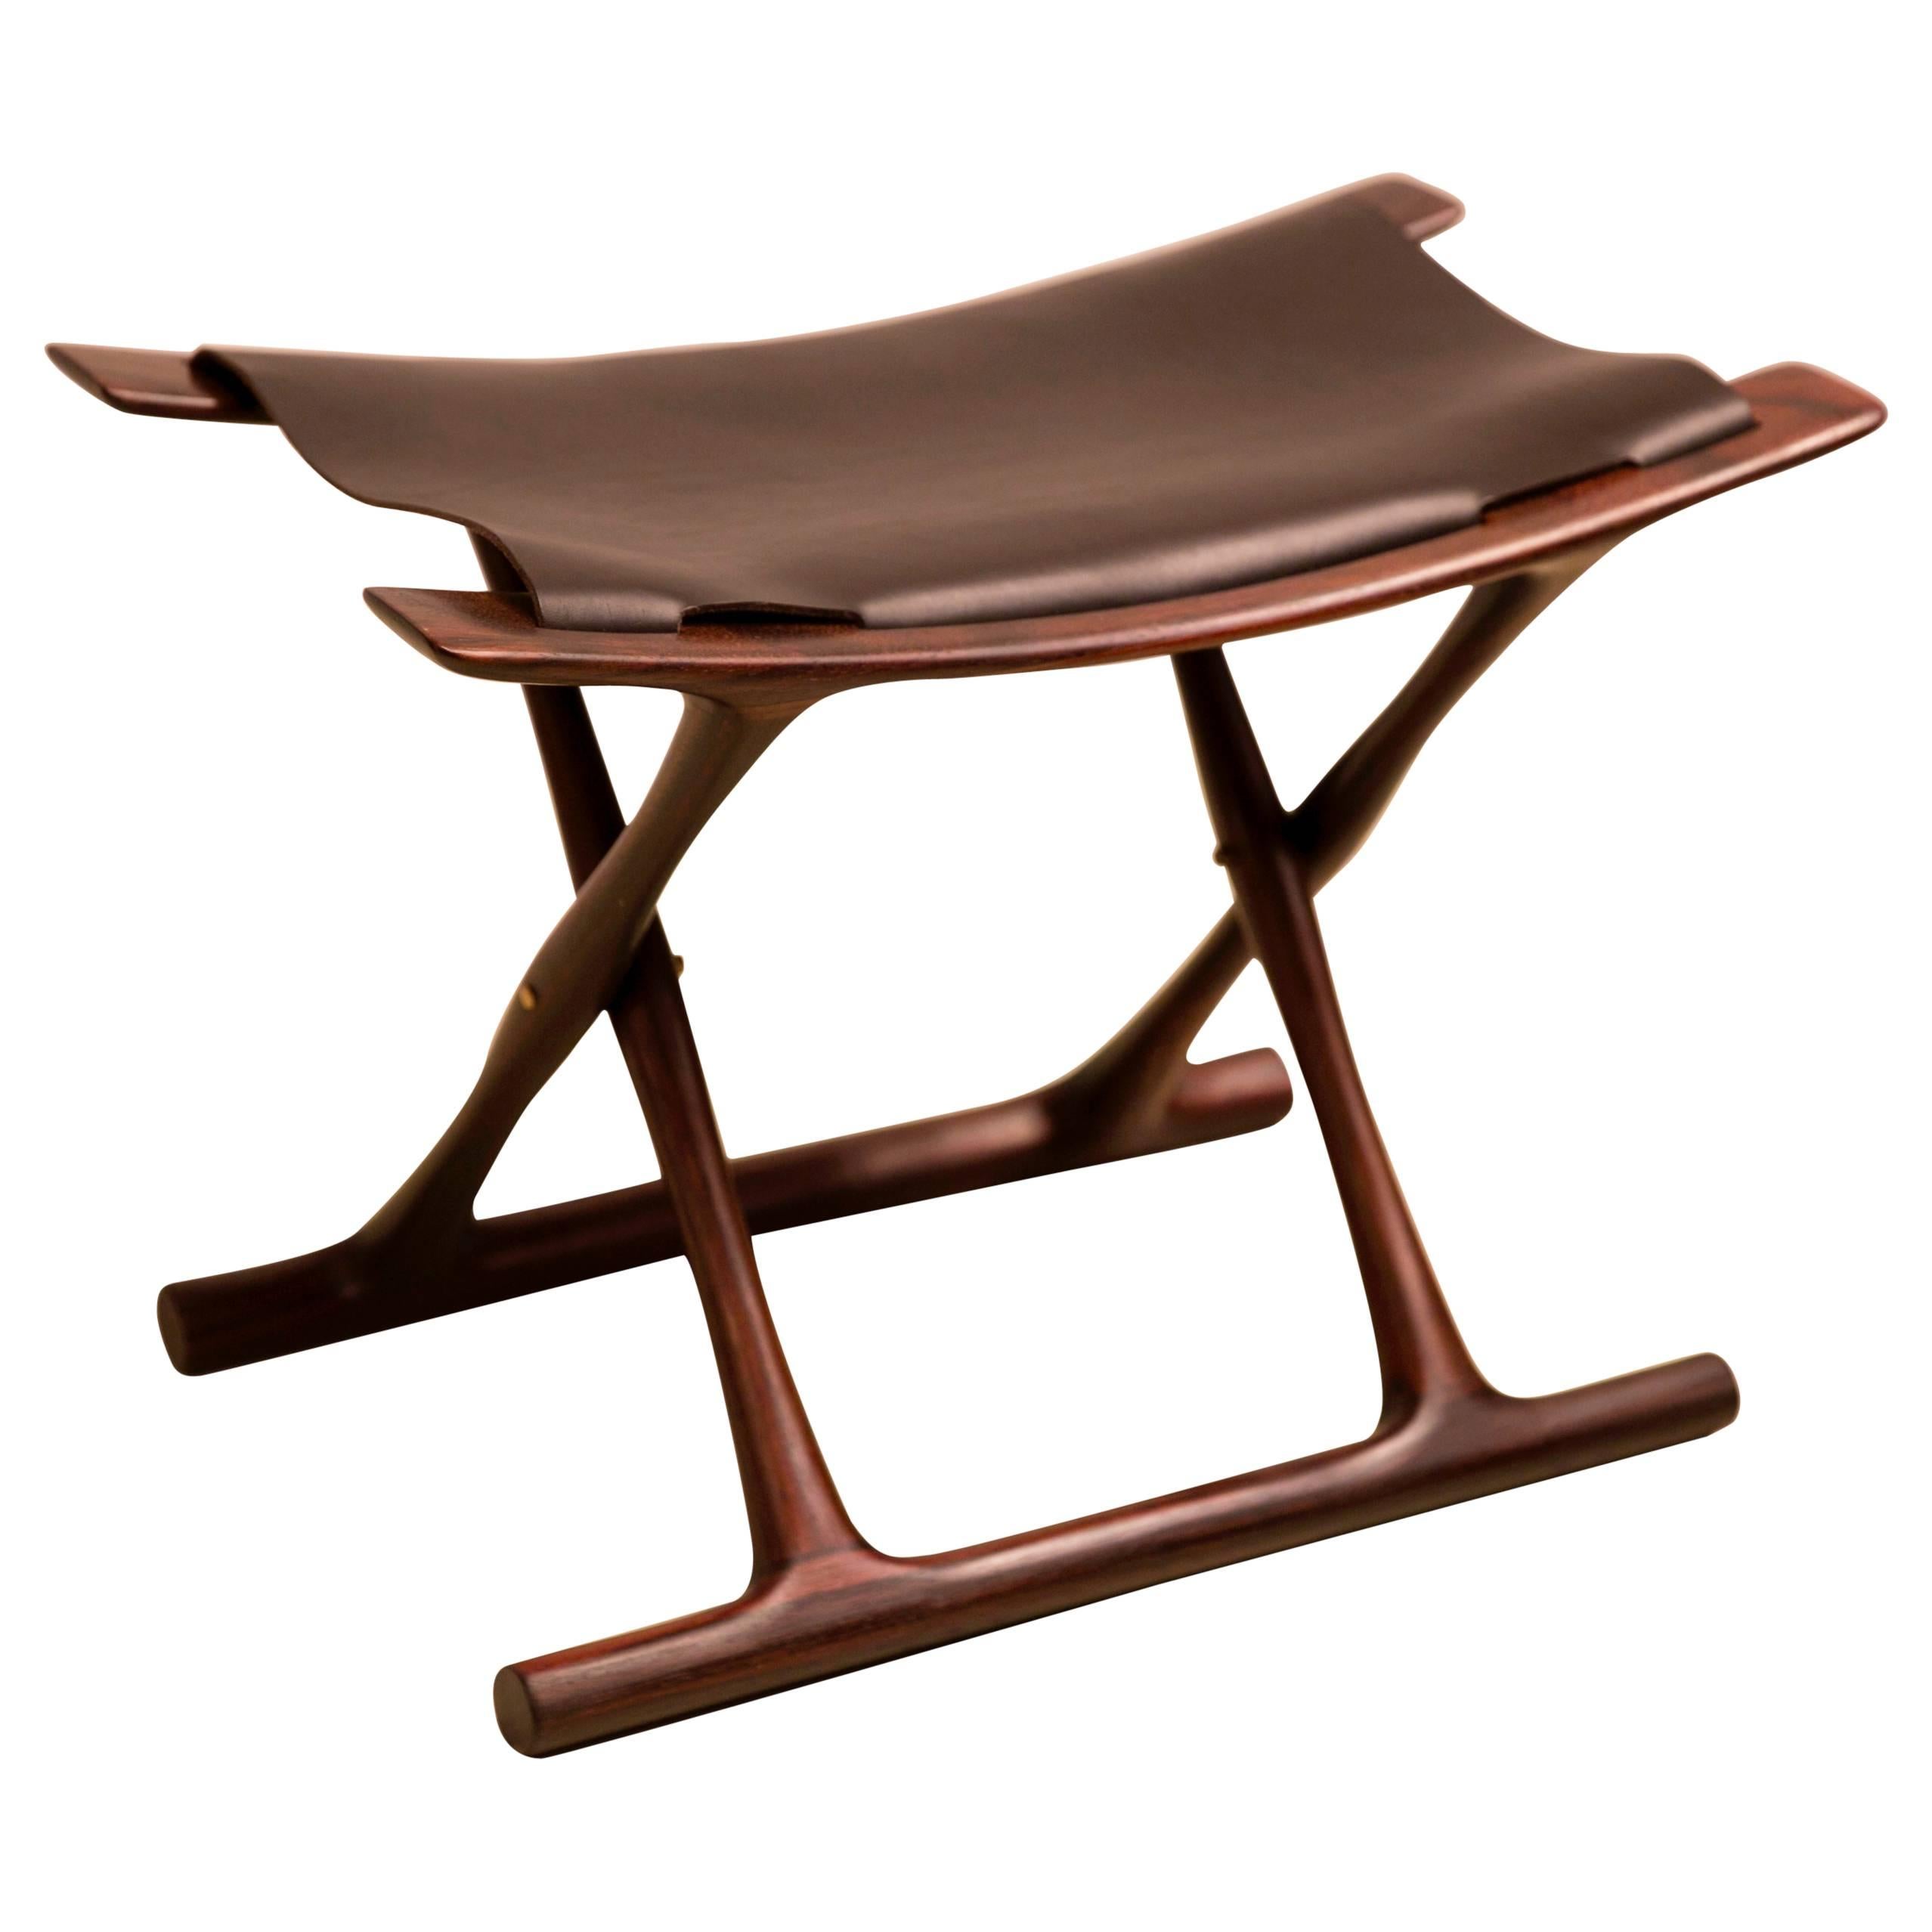 Egyptian Folding Stool by Ole Wanscher in Indian Rosewood and Black Leather im Angebot